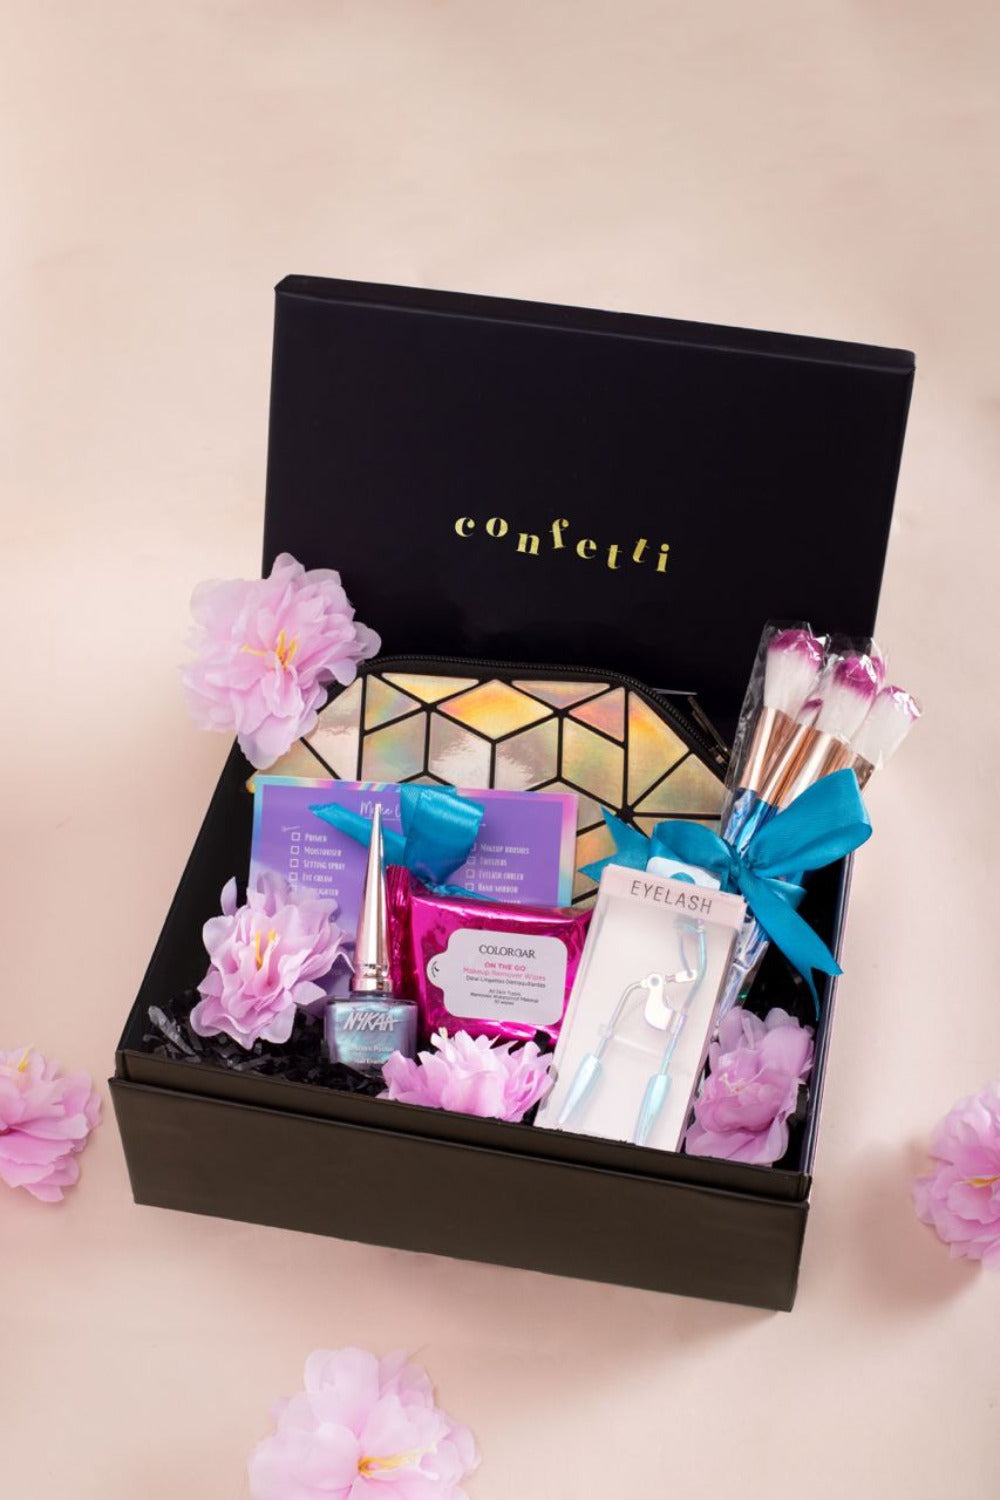 Mystery Custom Make up Box Self Care Gift Box Makeup Lucky Dip Surprise Box  Gift for Her Birthday Gift Happy Valentine's Day Gift Box 